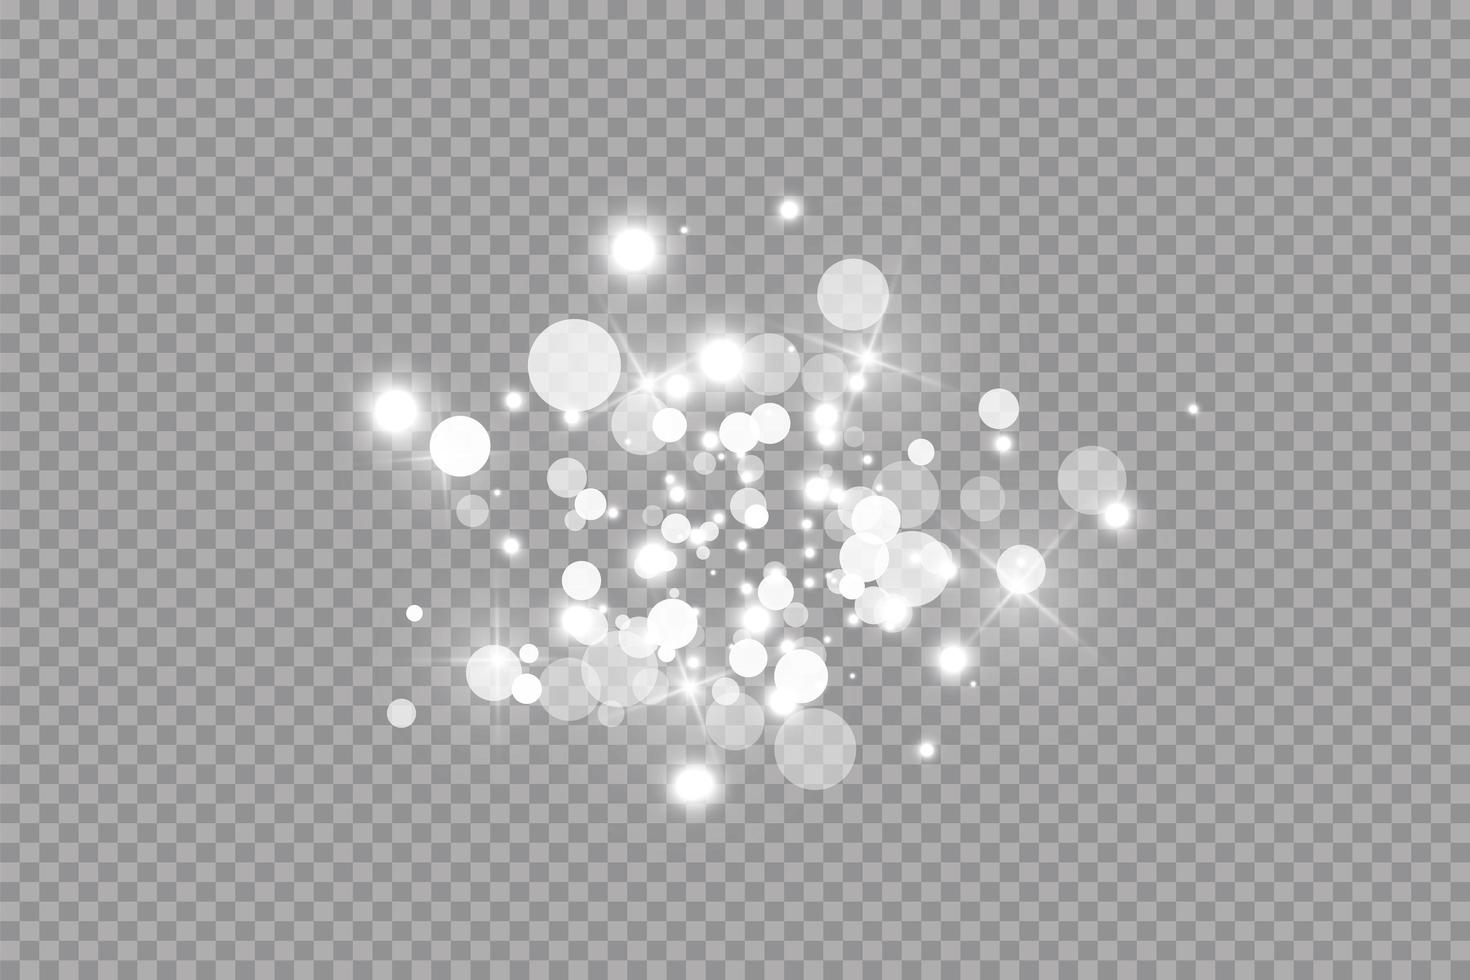 White sparks and glitter special light effect vector